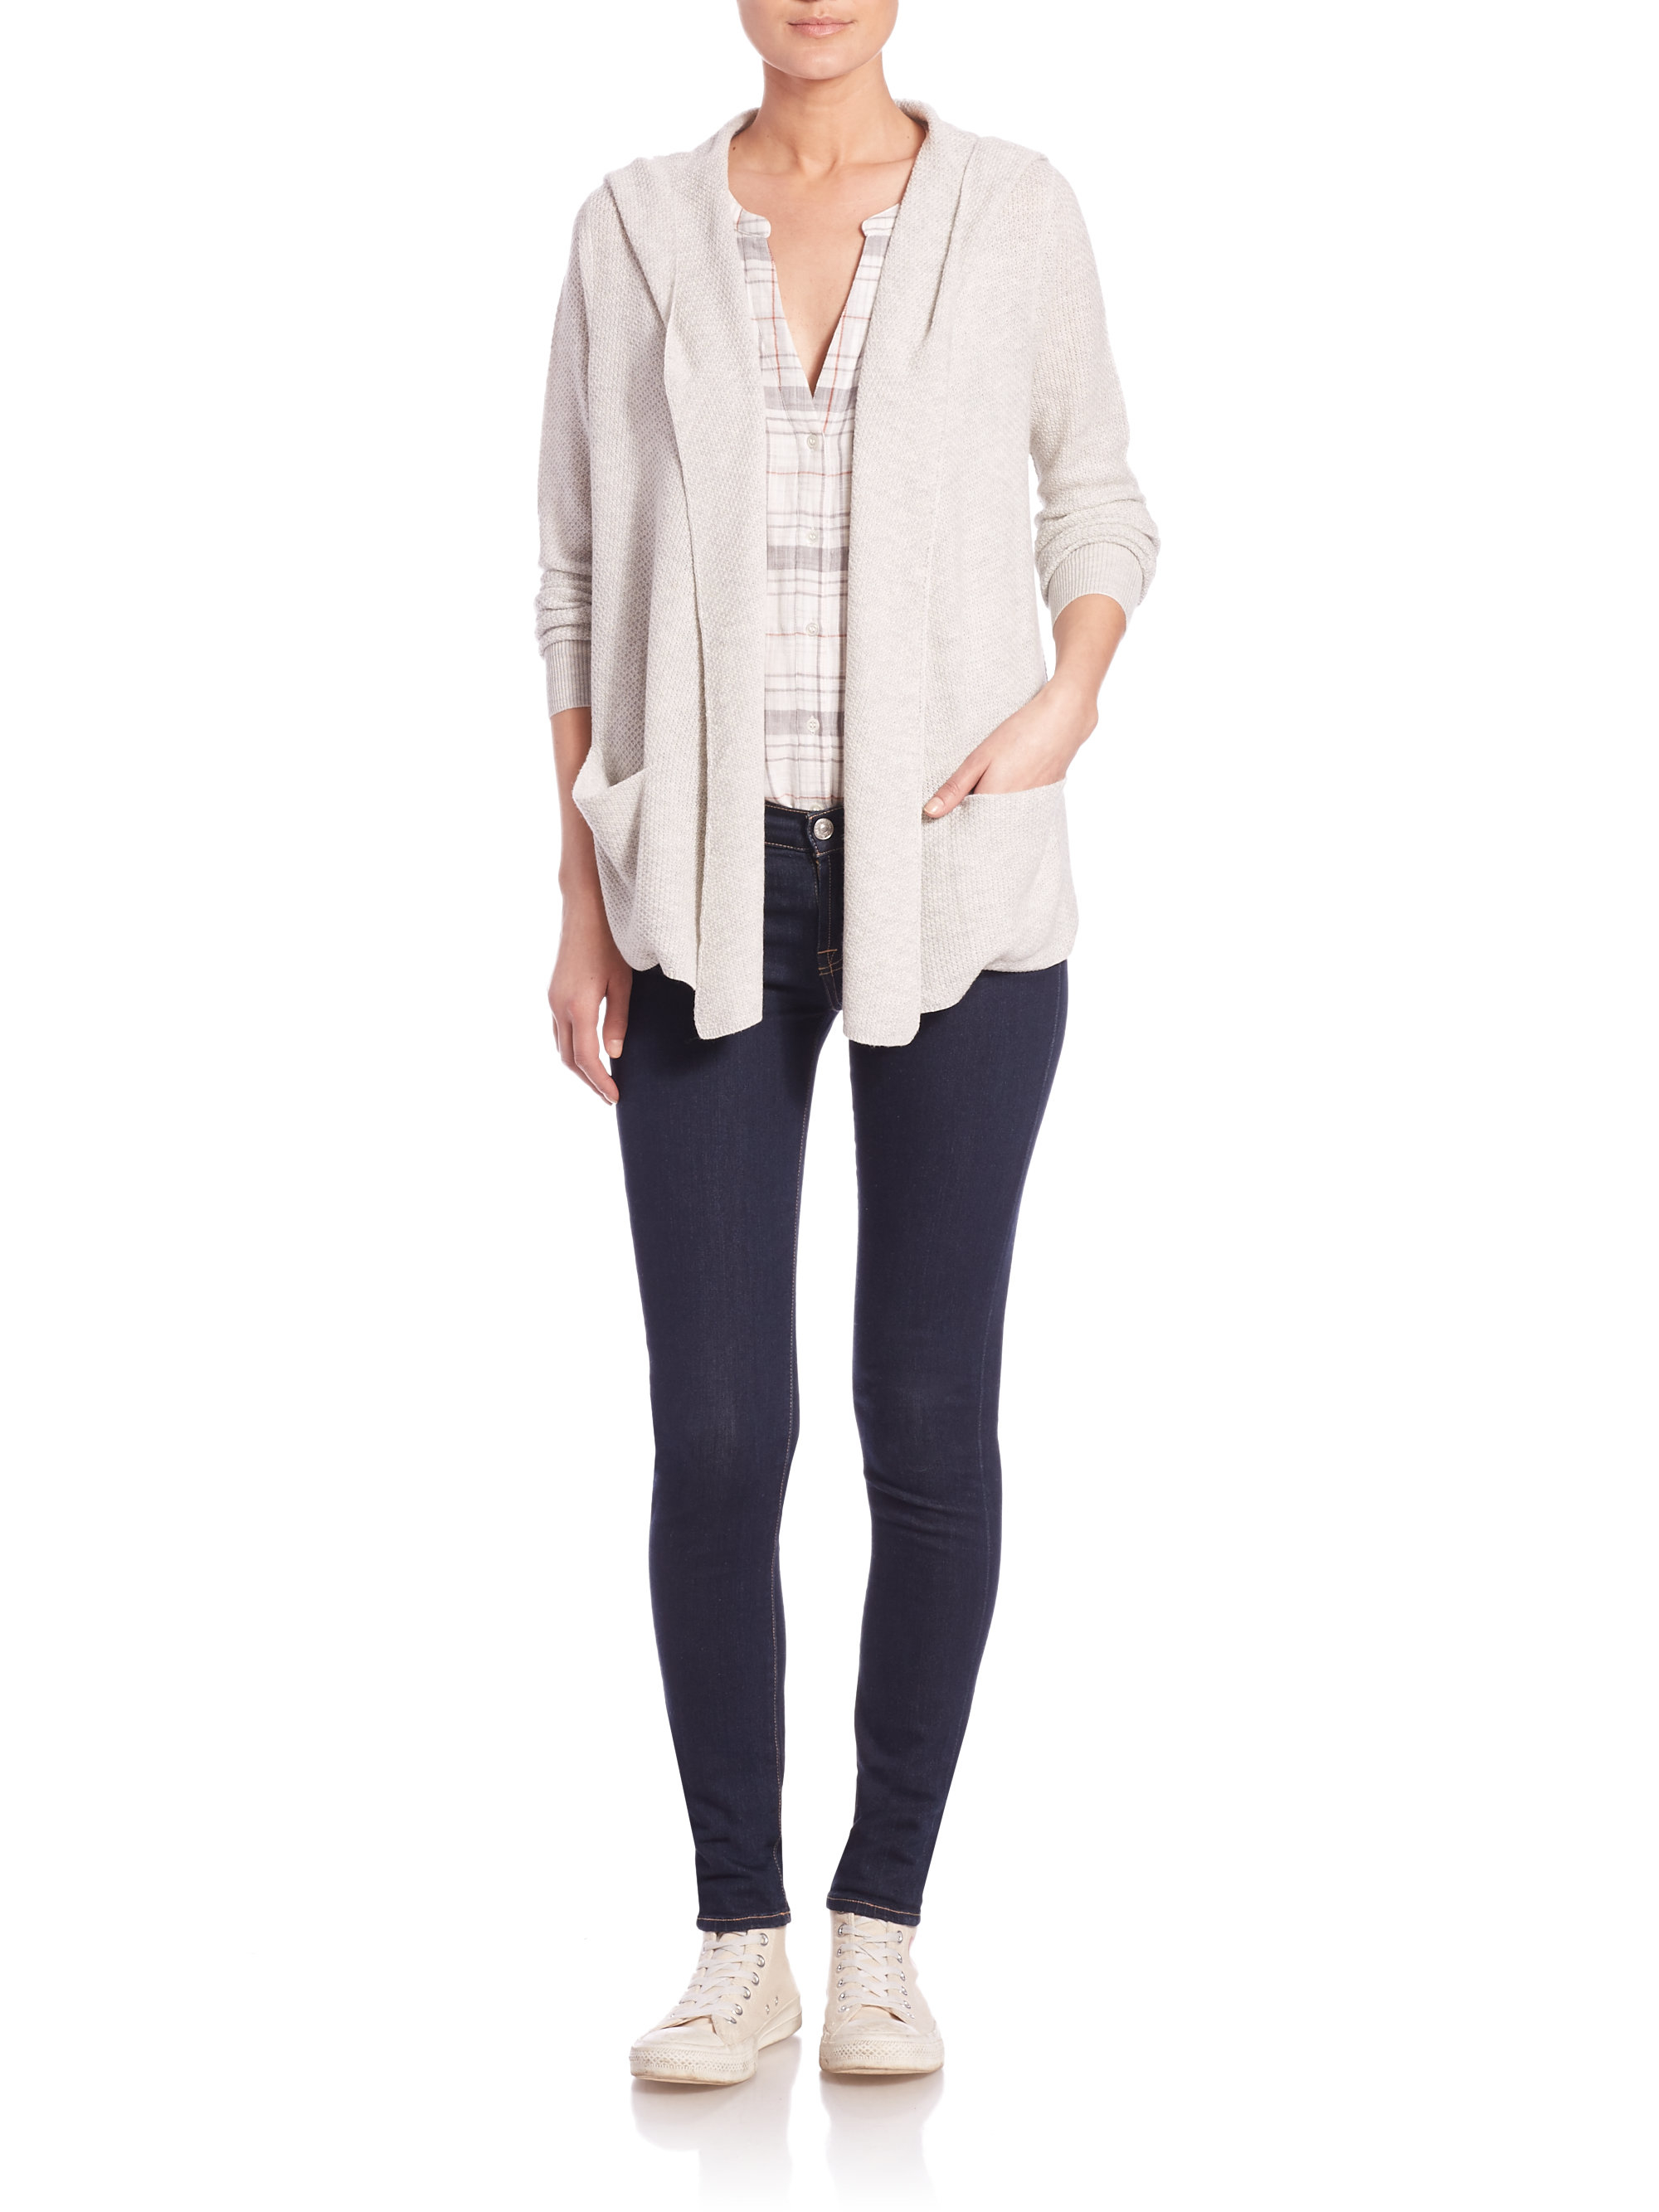 Soft joie Cary Hooded Cardigan in White | Lyst